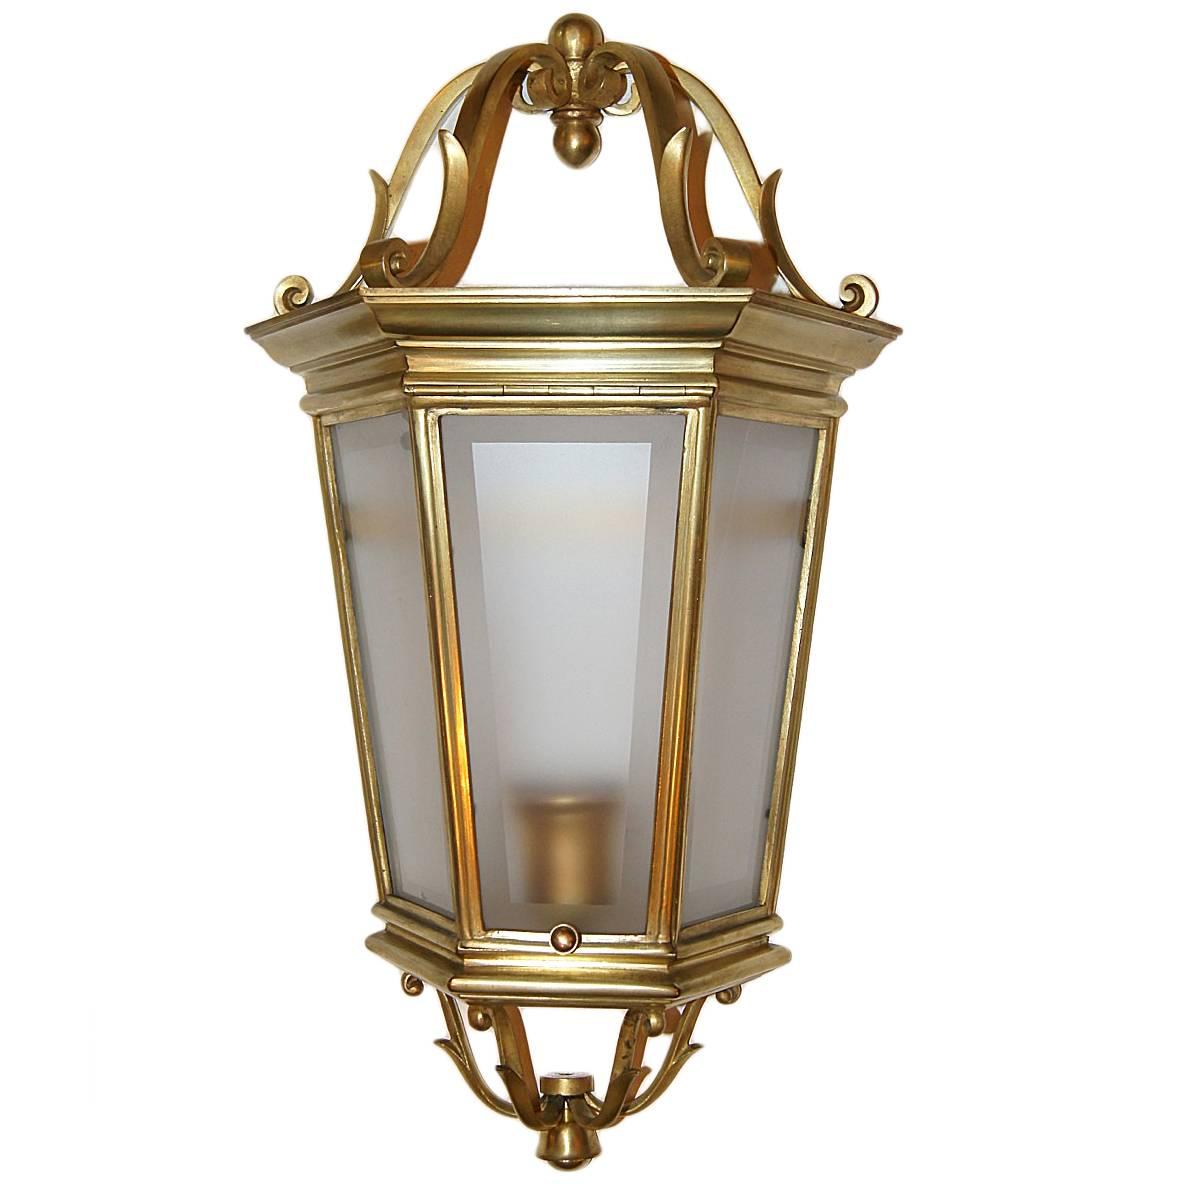 Set of four circa 1940s Italian bronze lanterns with frosted glass insets. Sold per pair.

Measurements:
Height 20